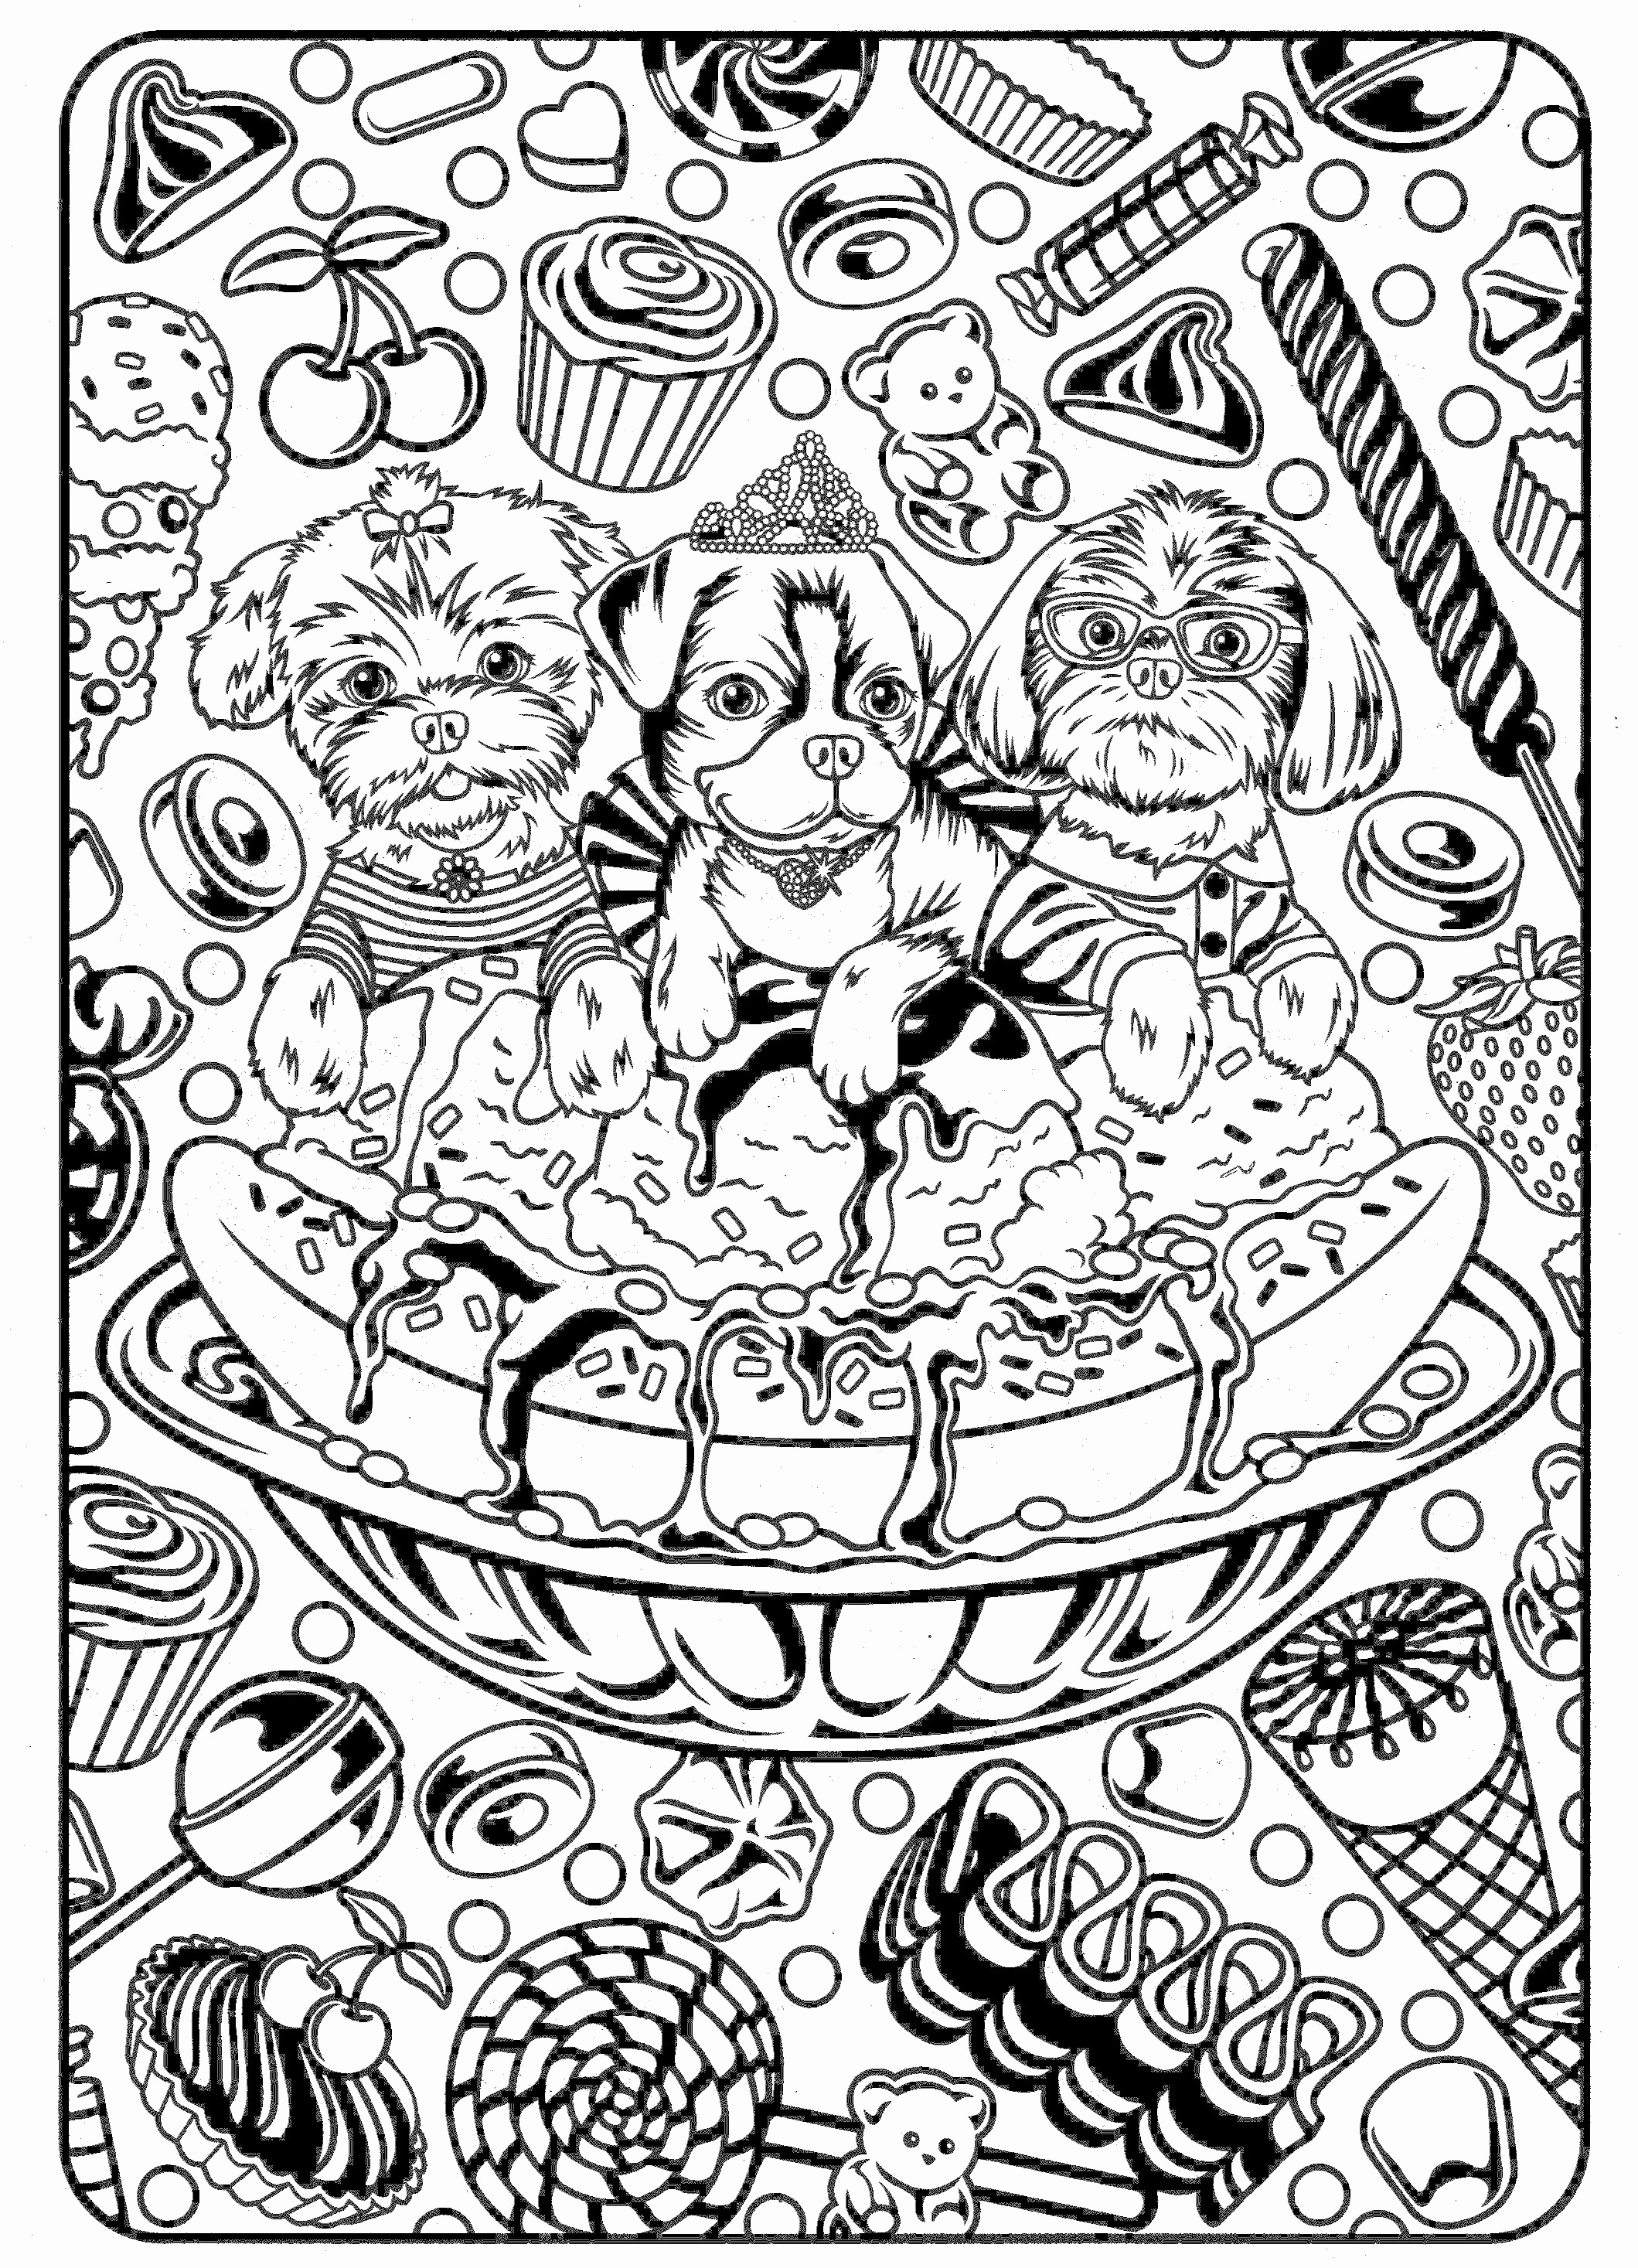 Christopher Columbus Coloring Pages Coloring Book Coloring Book Solar System Sheets Page New Stock